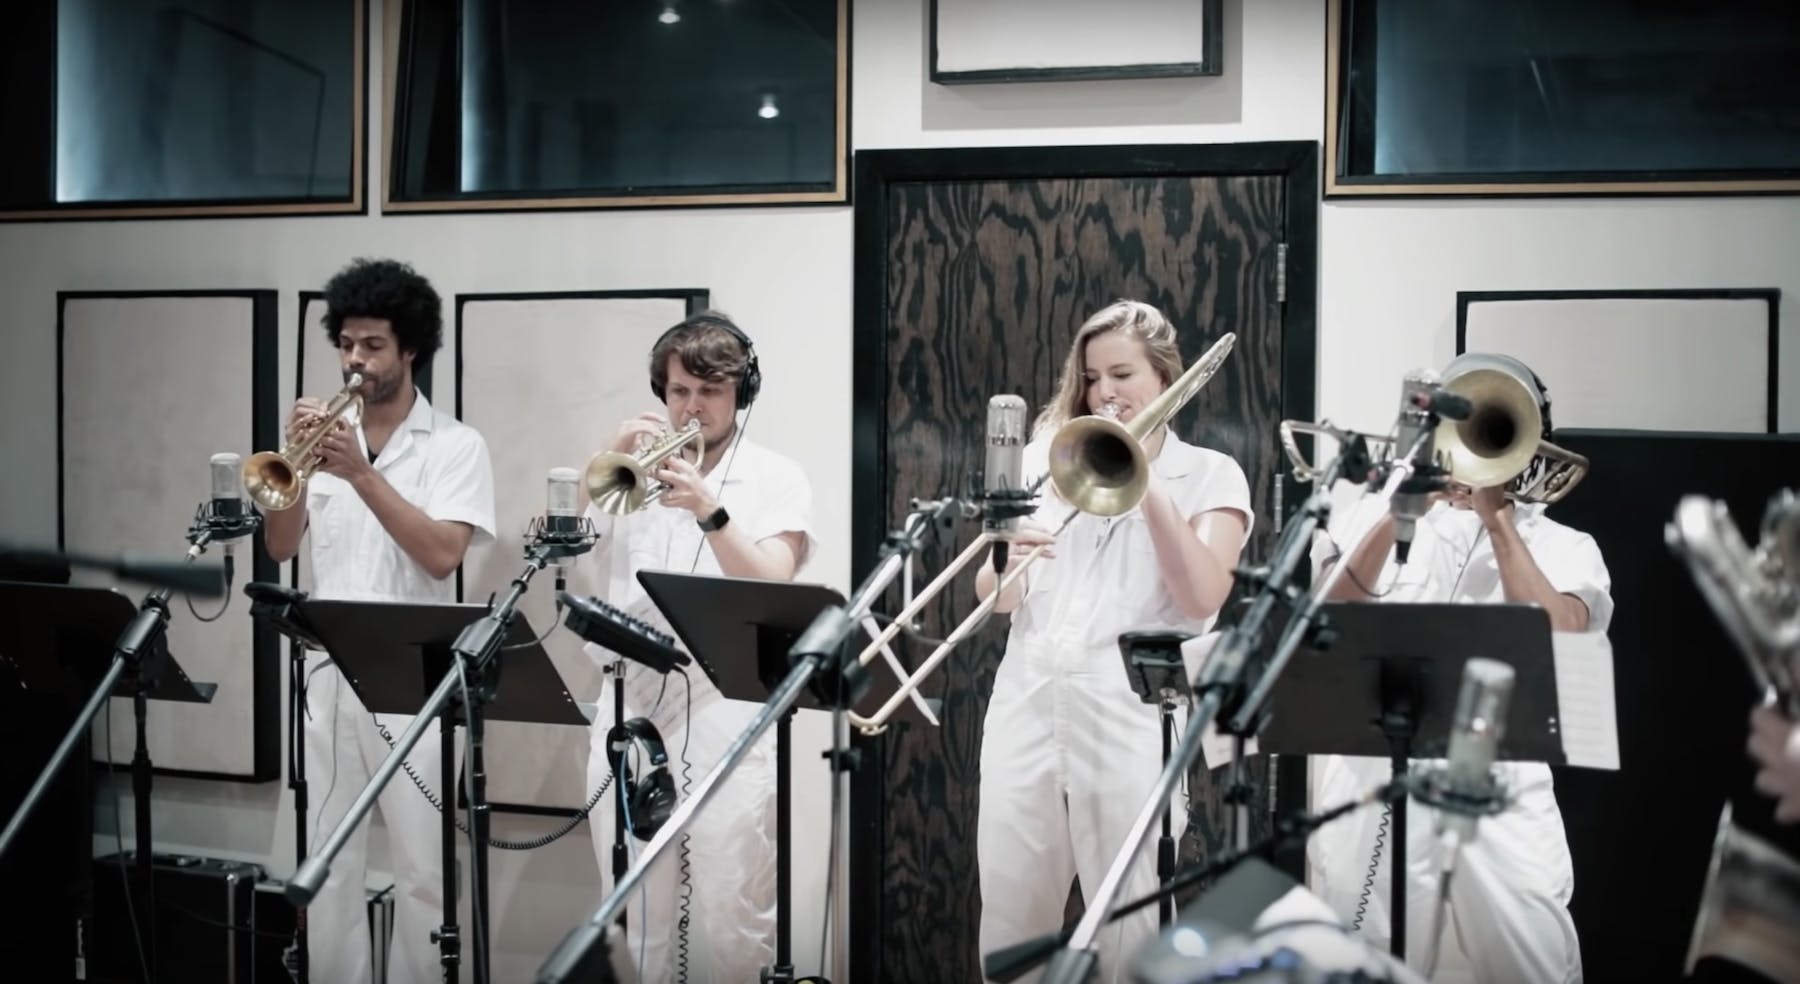 This Brass Cover Of Rage Against The Machine's Know Your Enemy Is Amazing